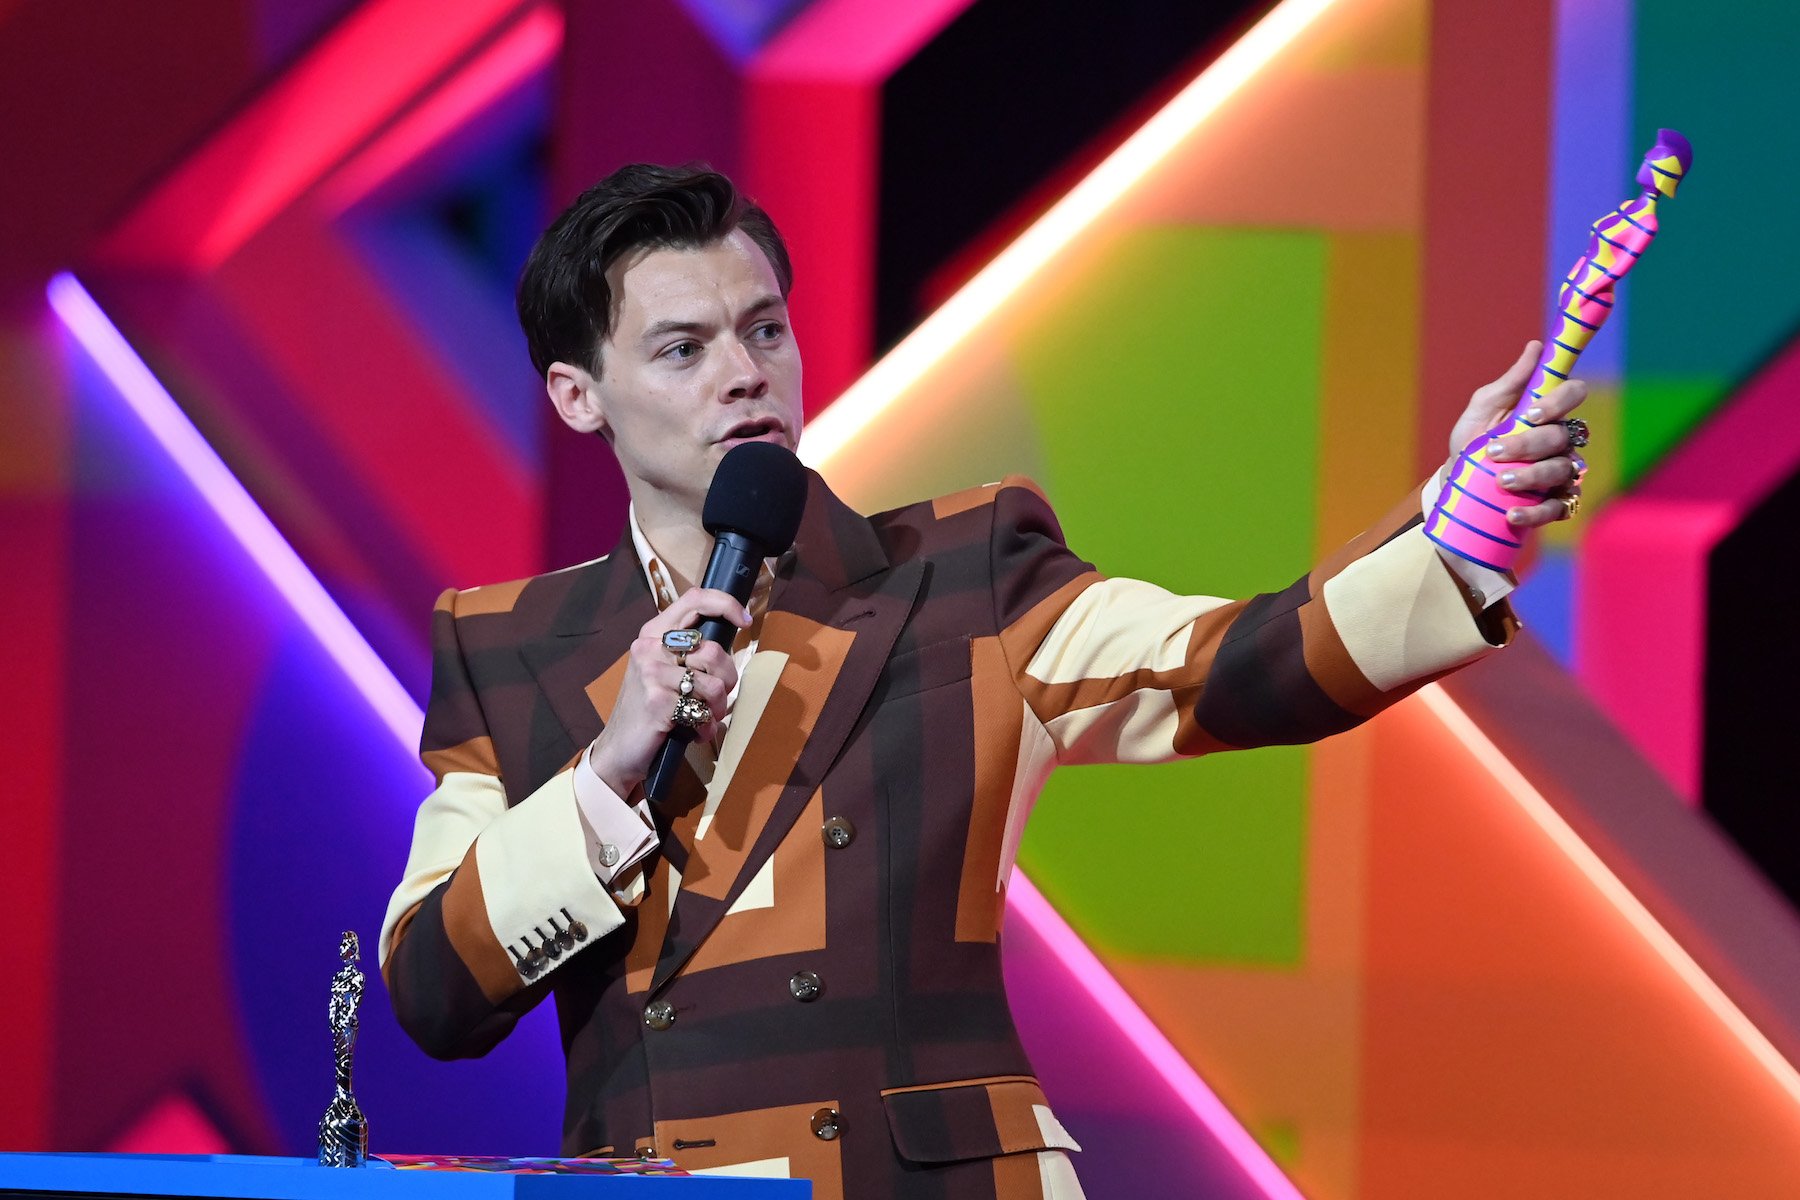 Grammy-winning singer Harry Styles, nominated for Record of the Year in 2023 alongside artists like Doja Cat, on stage wearing a brown striped suit